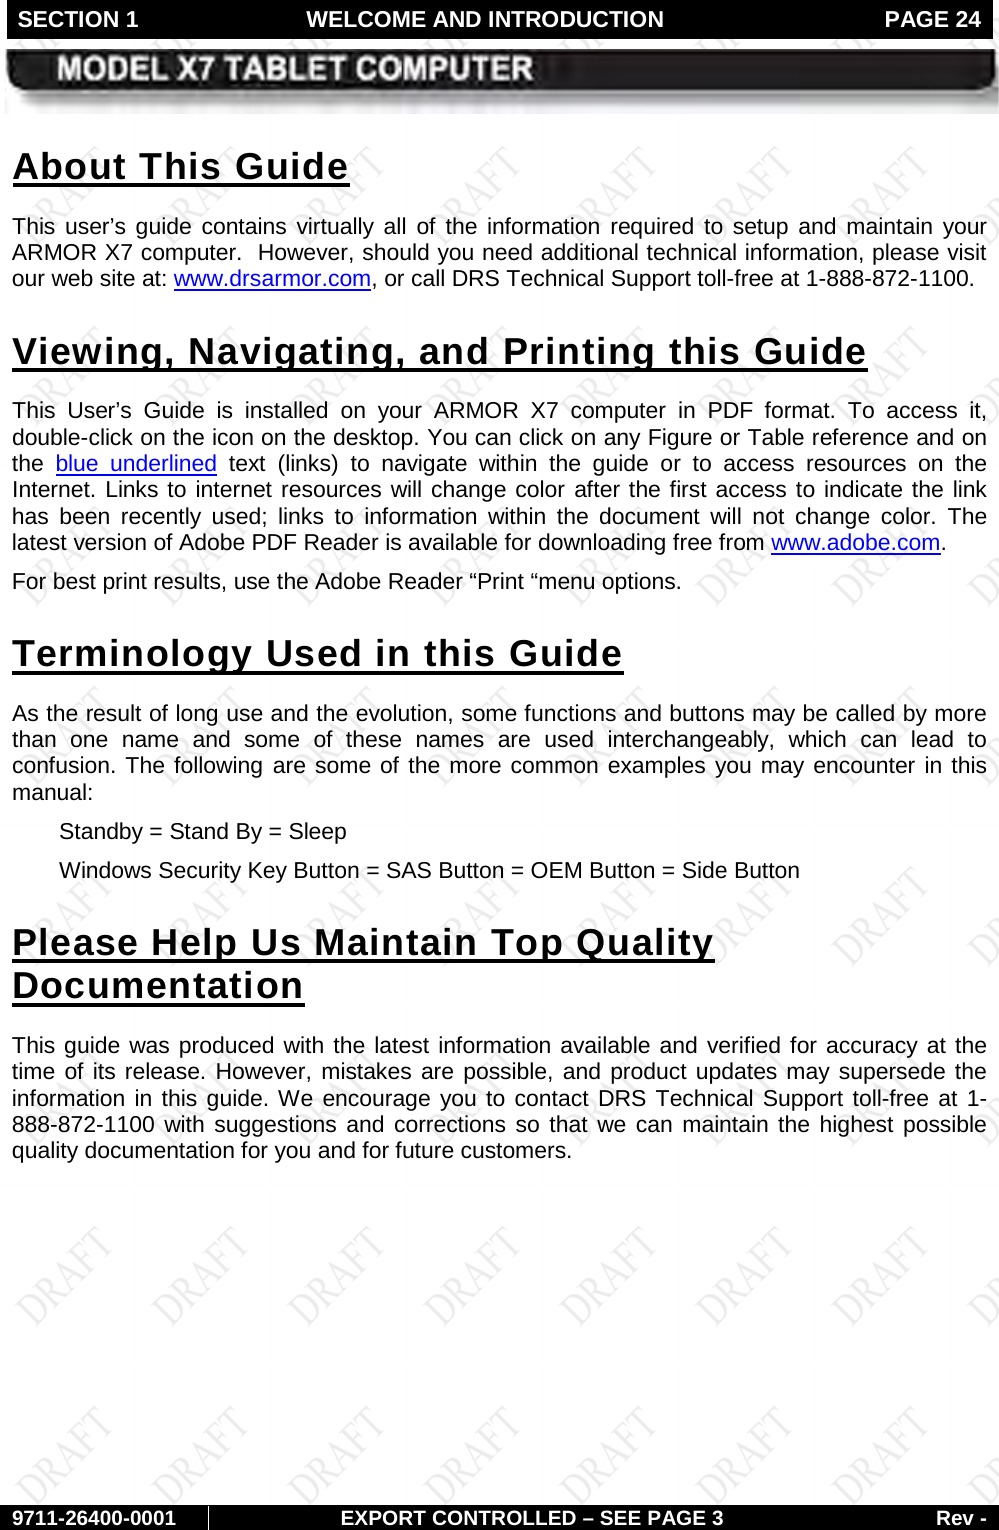 SECTION 1 WELCOME AND INTRODUCTION  PAGE 24        9711-26400-0001 EXPORT CONTROLLED – SEE PAGE 3 Rev - This  user’s guide contains virtually all of the  information  required to setup and maintain your ARMOR X7 computer.  However, should you need additional technical information, please visit our web site at: About This Guide www.drsarmor.com, or call DRS Technical Support toll-free at 1-888-872-1100.  This User’s Guide is installed on your ARMOR X7 computer in PDF format. To access it, double-click on the icon on the desktop. You can click on any Figure or Table reference and on the Viewing, Navigating, and Printing this Guide blue underlined text (links) to navigate within the guide or  to access resources on the Internet. Links to internet resources will change color after the first access to indicate the link has been recently used; links to information within the document will not change color. The latest version of Adobe PDF Reader is available for downloading free from www.adobe.com.  For best print results, use the Adobe Reader “Print “menu options. As the result of long use and the evolution, some functions and buttons may be called by more than one name and some of these names are used interchangeably, which can lead to confusion. The following are some of the more common examples you may encounter in this manual: Terminology Used in this Guide  Standby = Stand By = Sleep  Windows Security Key Button = SAS Button = OEM Button = Side Button  This guide was produced with the latest information available and verified for accuracy at the time of its release. However, mistakes are possible, and product updates may supersede the information in this guide. We encourage you to contact DRS Technical Support toll-free at 1-888-872-1100 with suggestions and corrections so that we can maintain the highest possible quality documentation for you and for future customers. Please Help Us Maintain Top Quality Documentation    